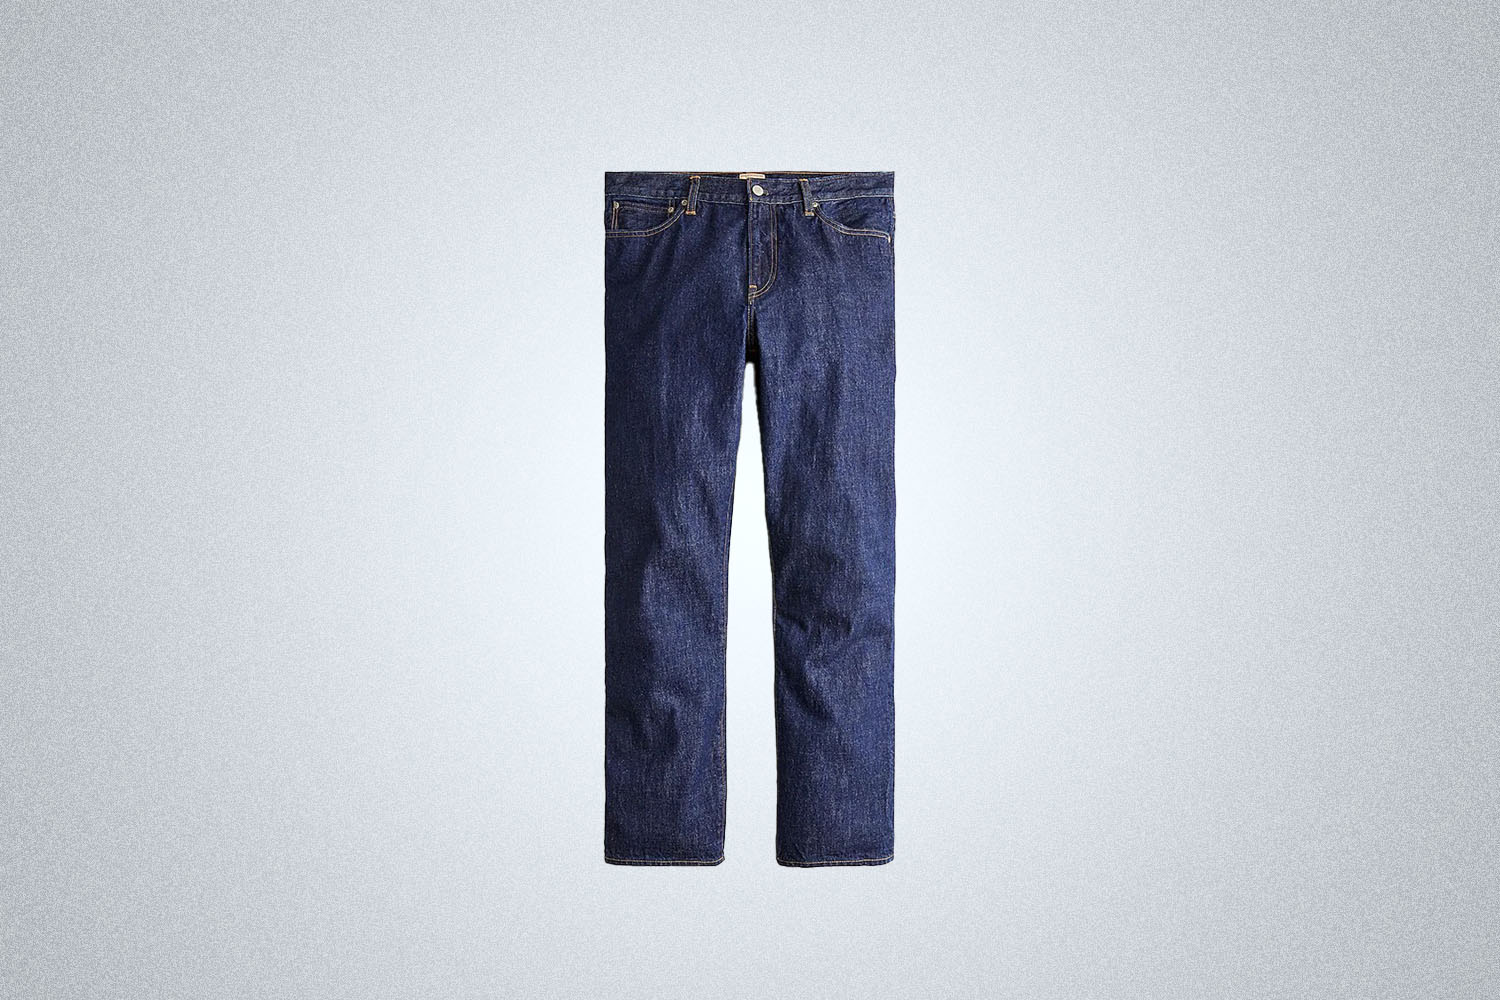 The J.Crew Classic Relaxed-fit jean in resin rinse on a gray background